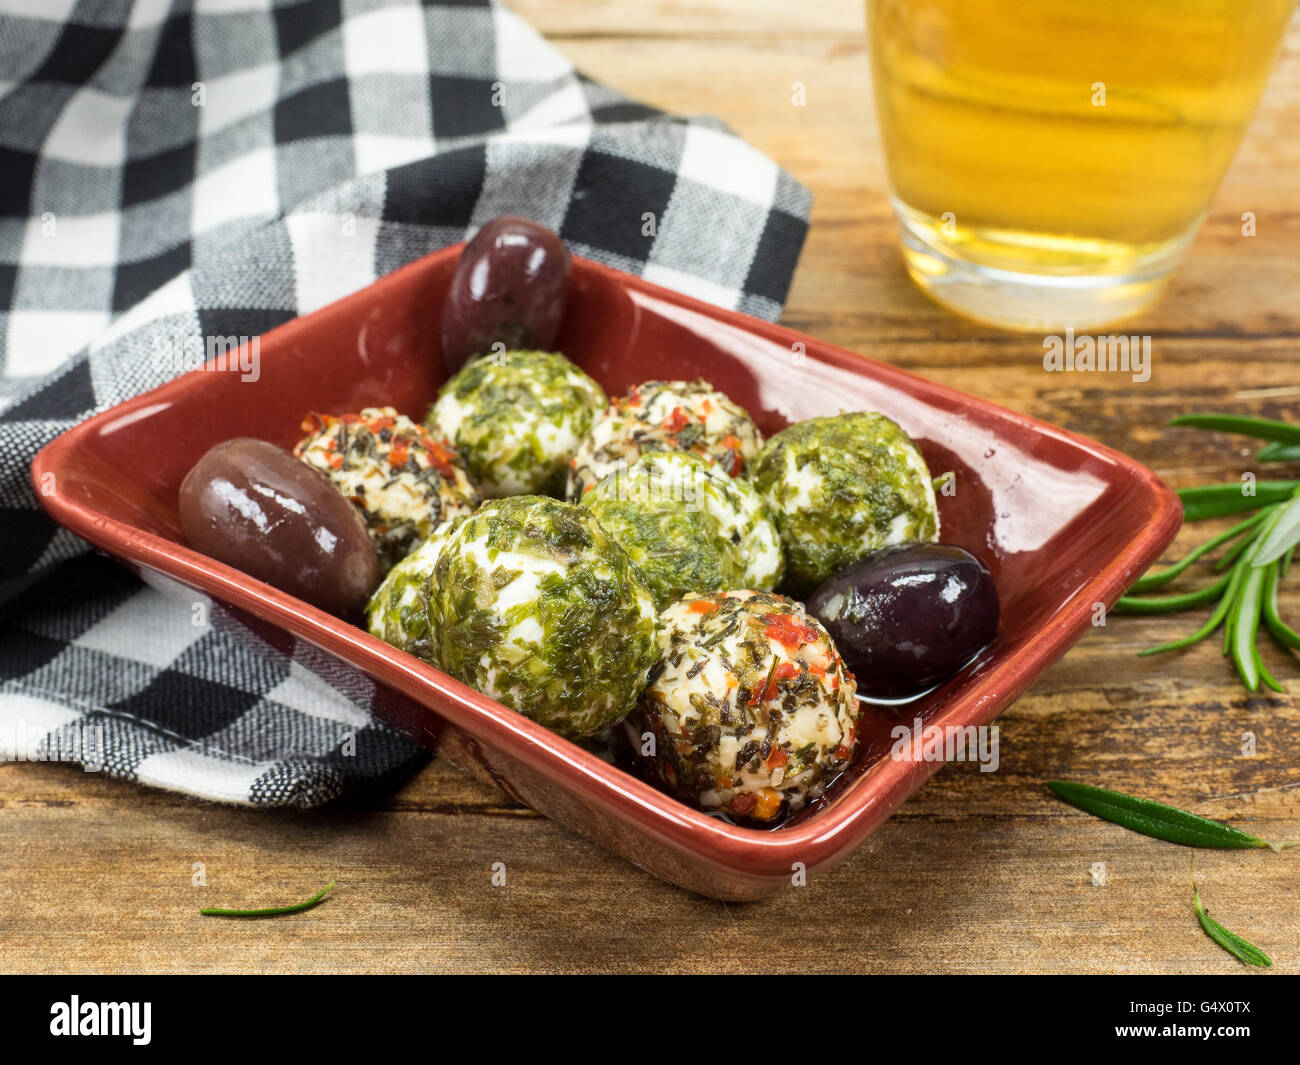 Cream cheese balls with herbs from goat's milk Stock Photo